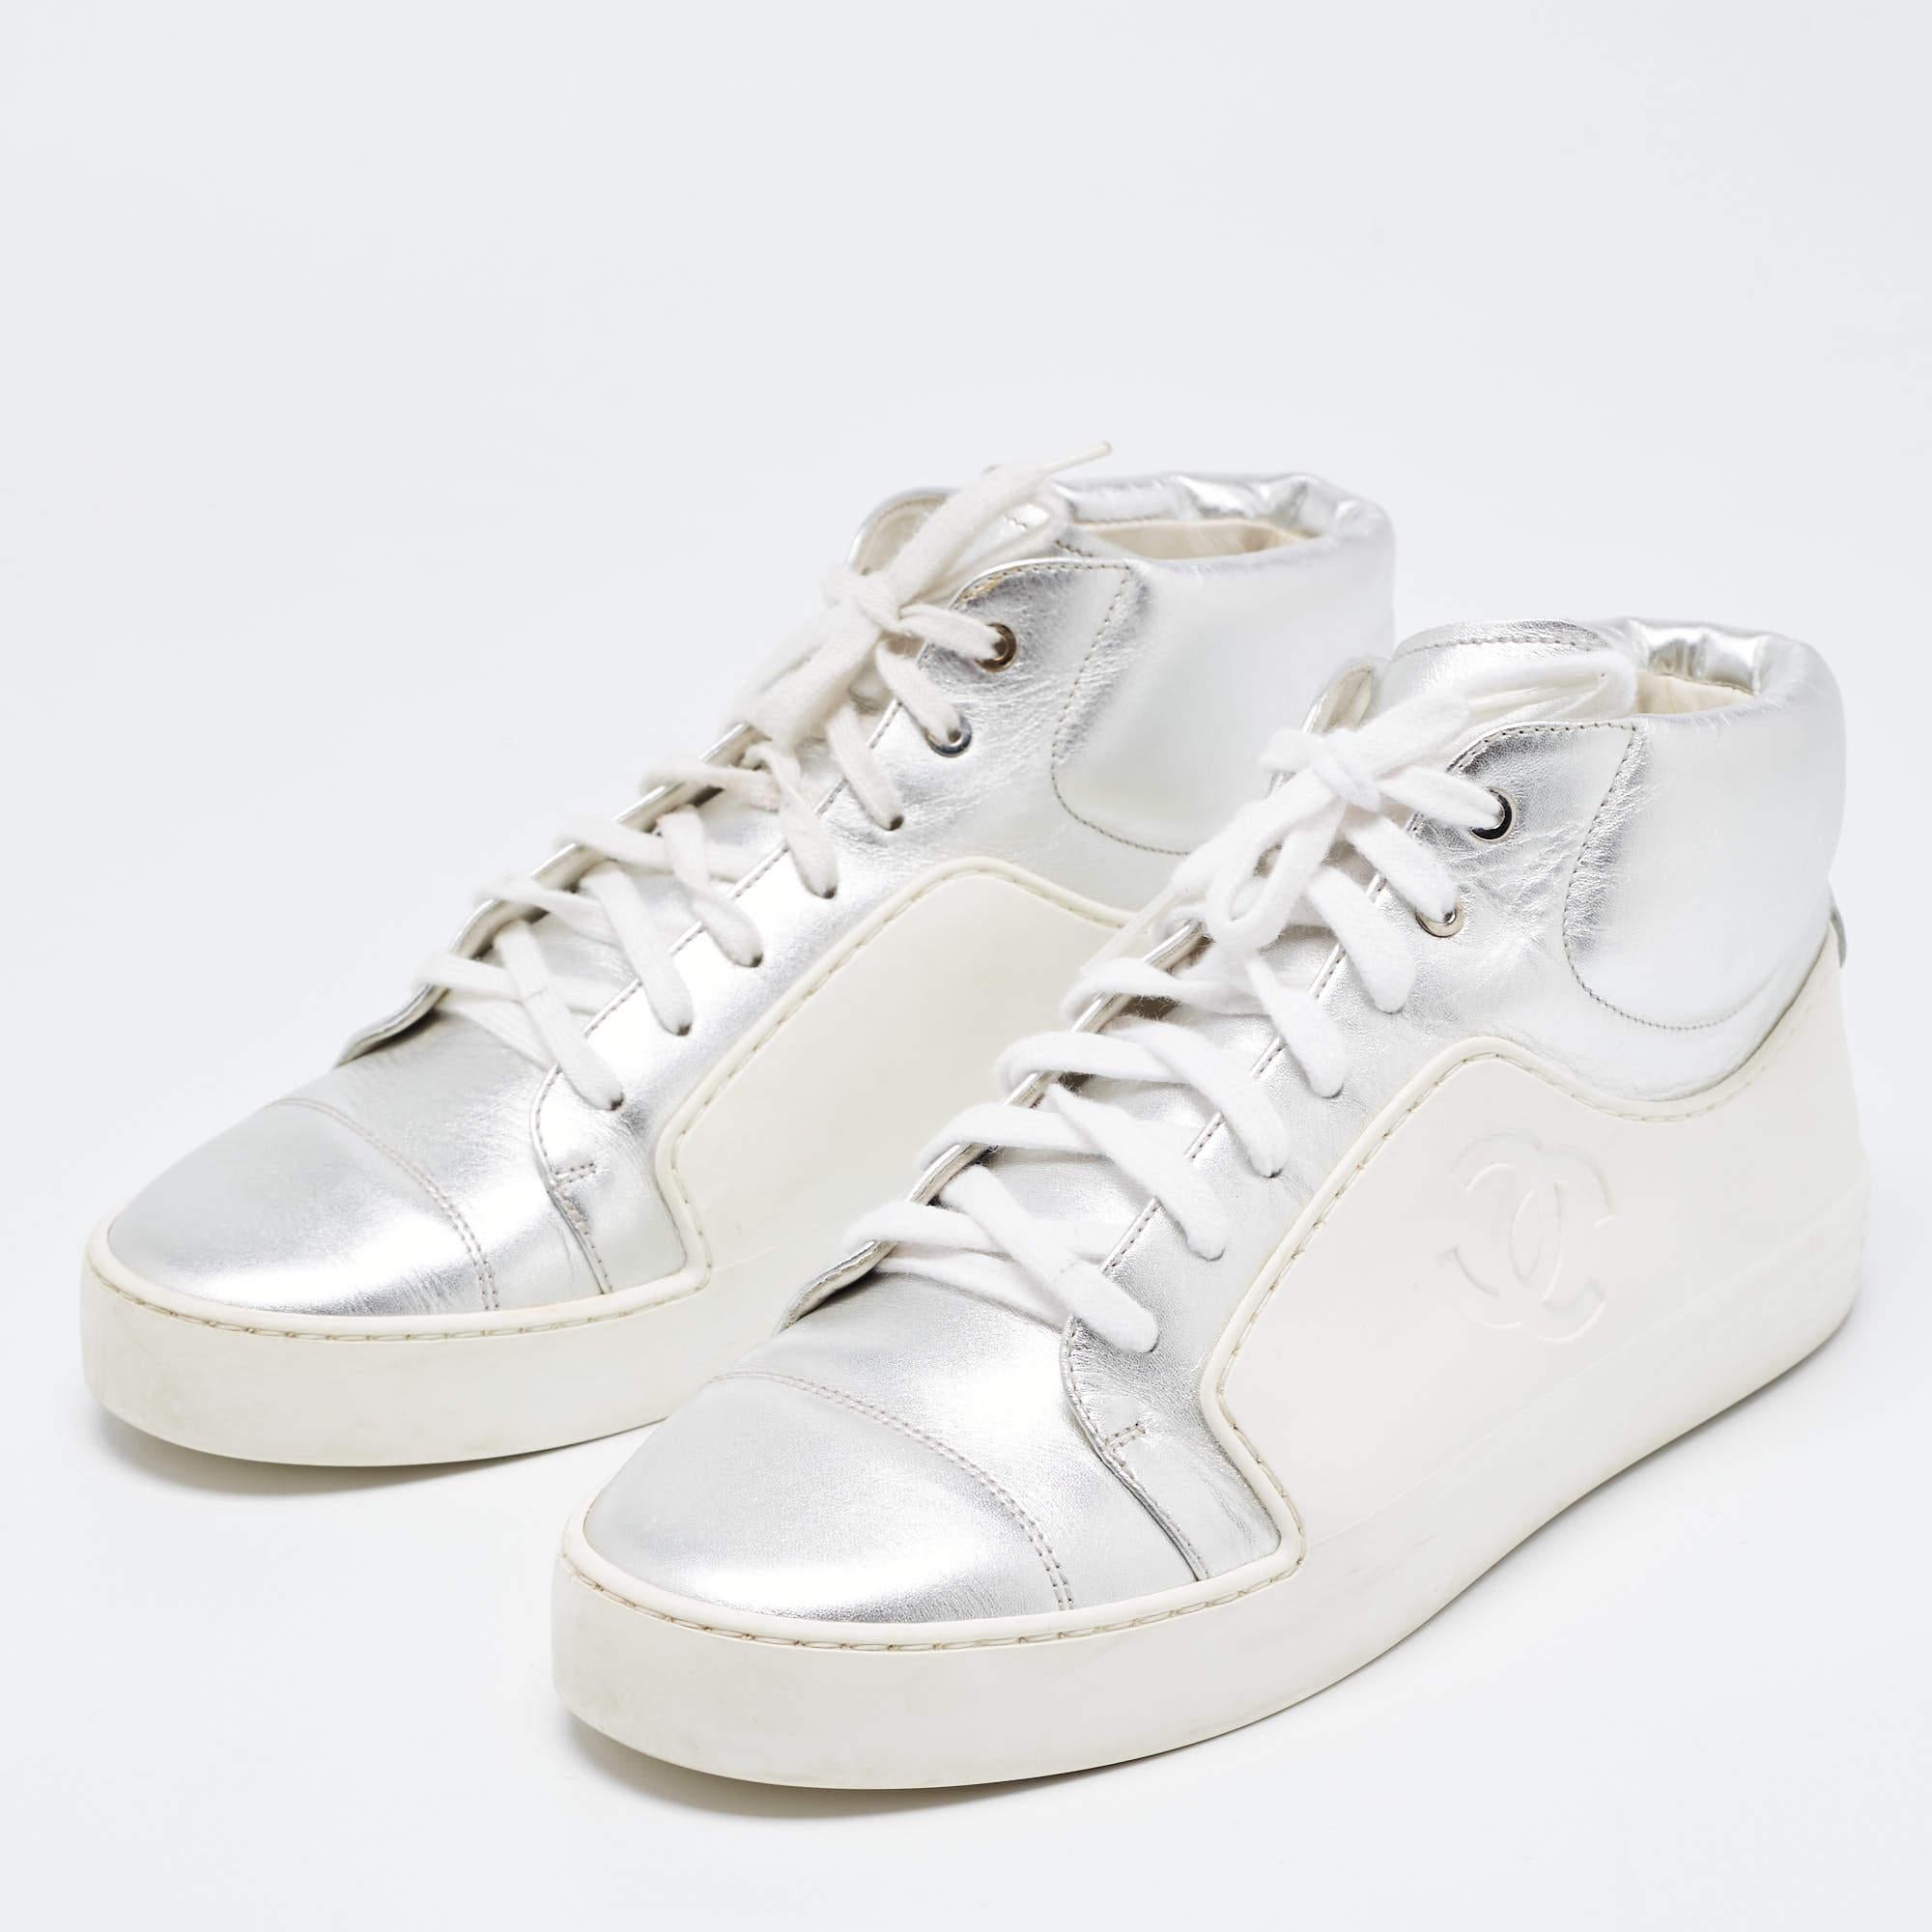 Men's Chanel Metallic Silver/White Leather And Rubber Lace Up High Top Sneakers Size 3 For Sale